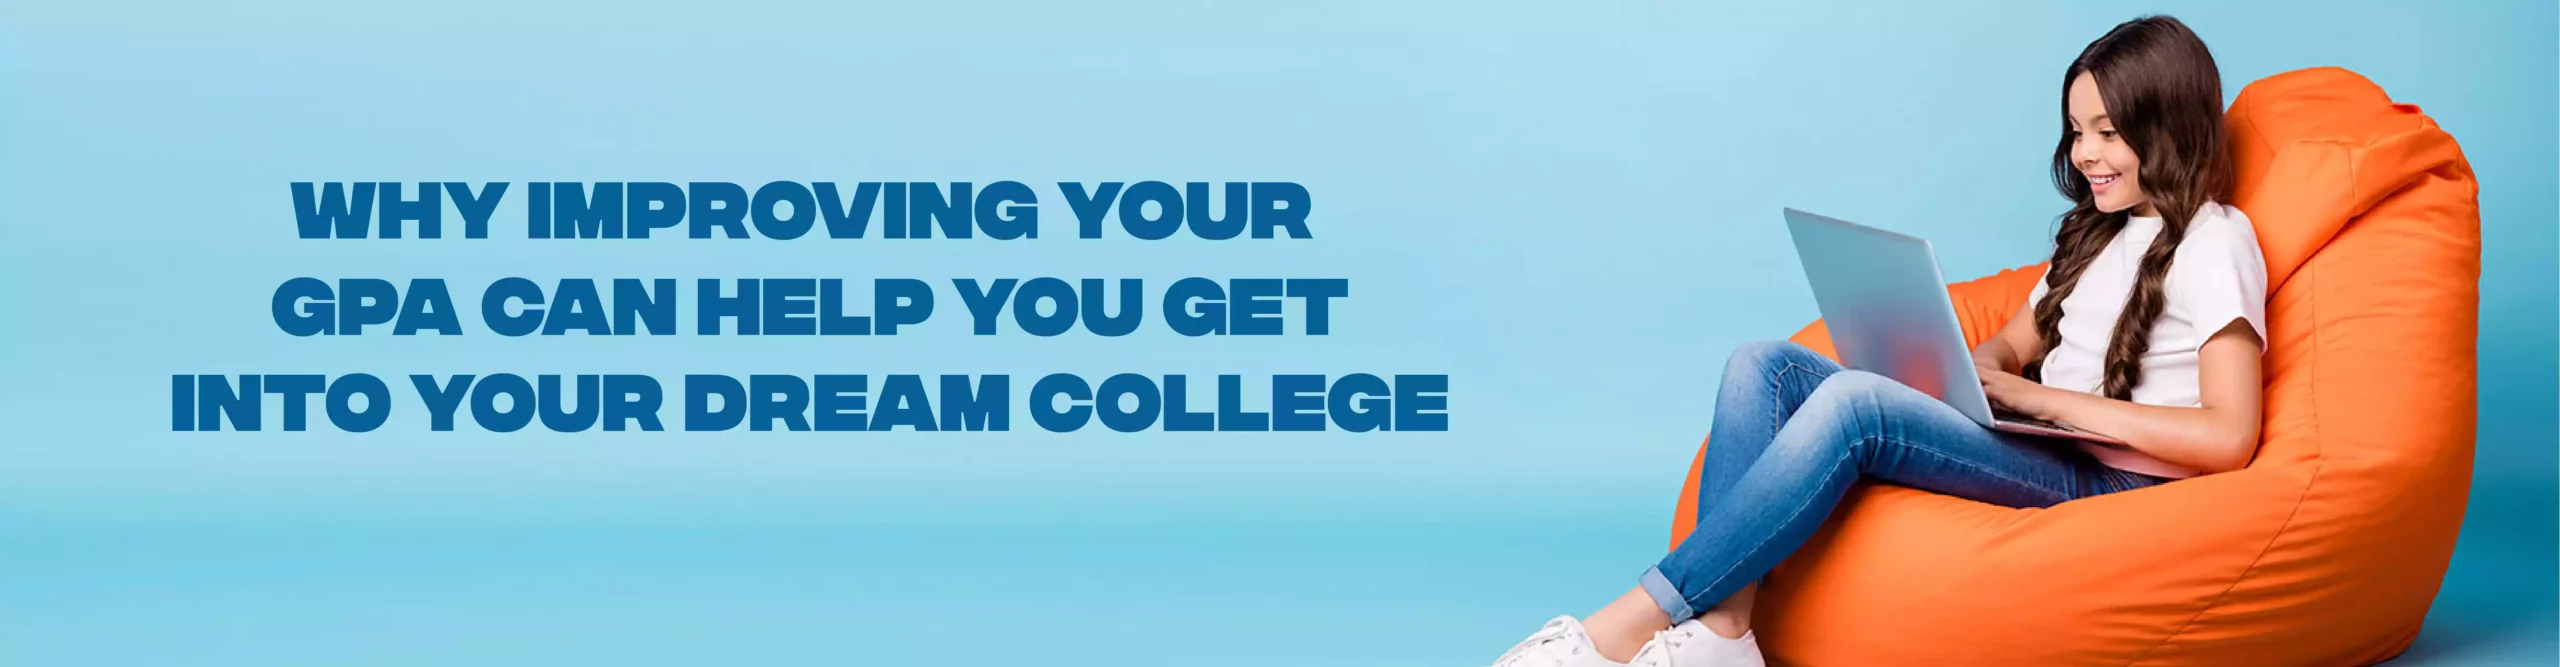 Improving Your GPA Can Help You Get Into Your Dream College